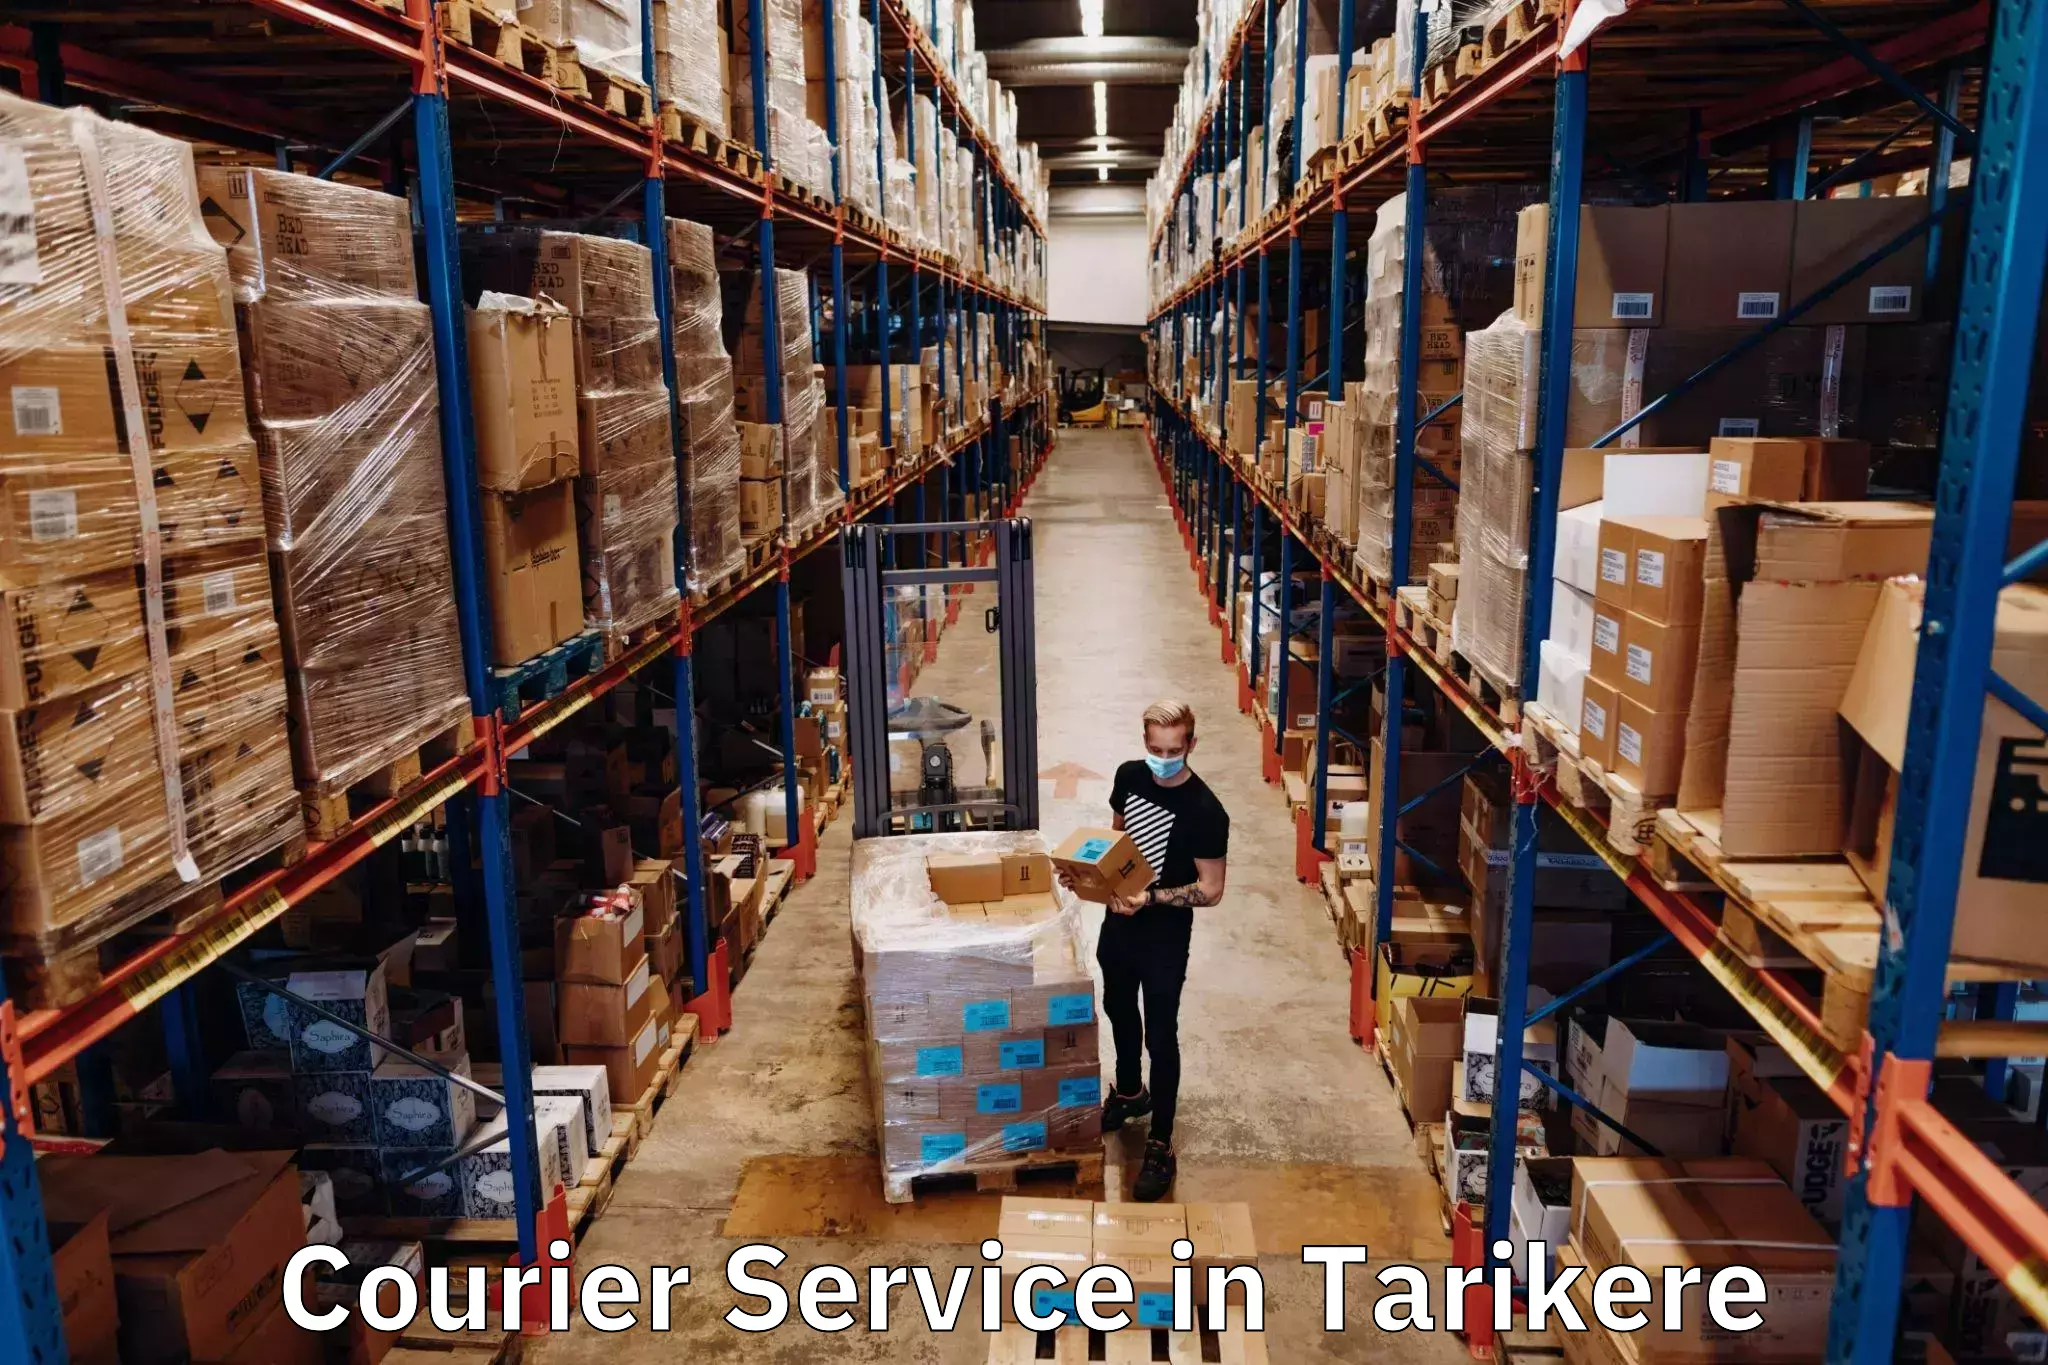 Courier services in Tarikere